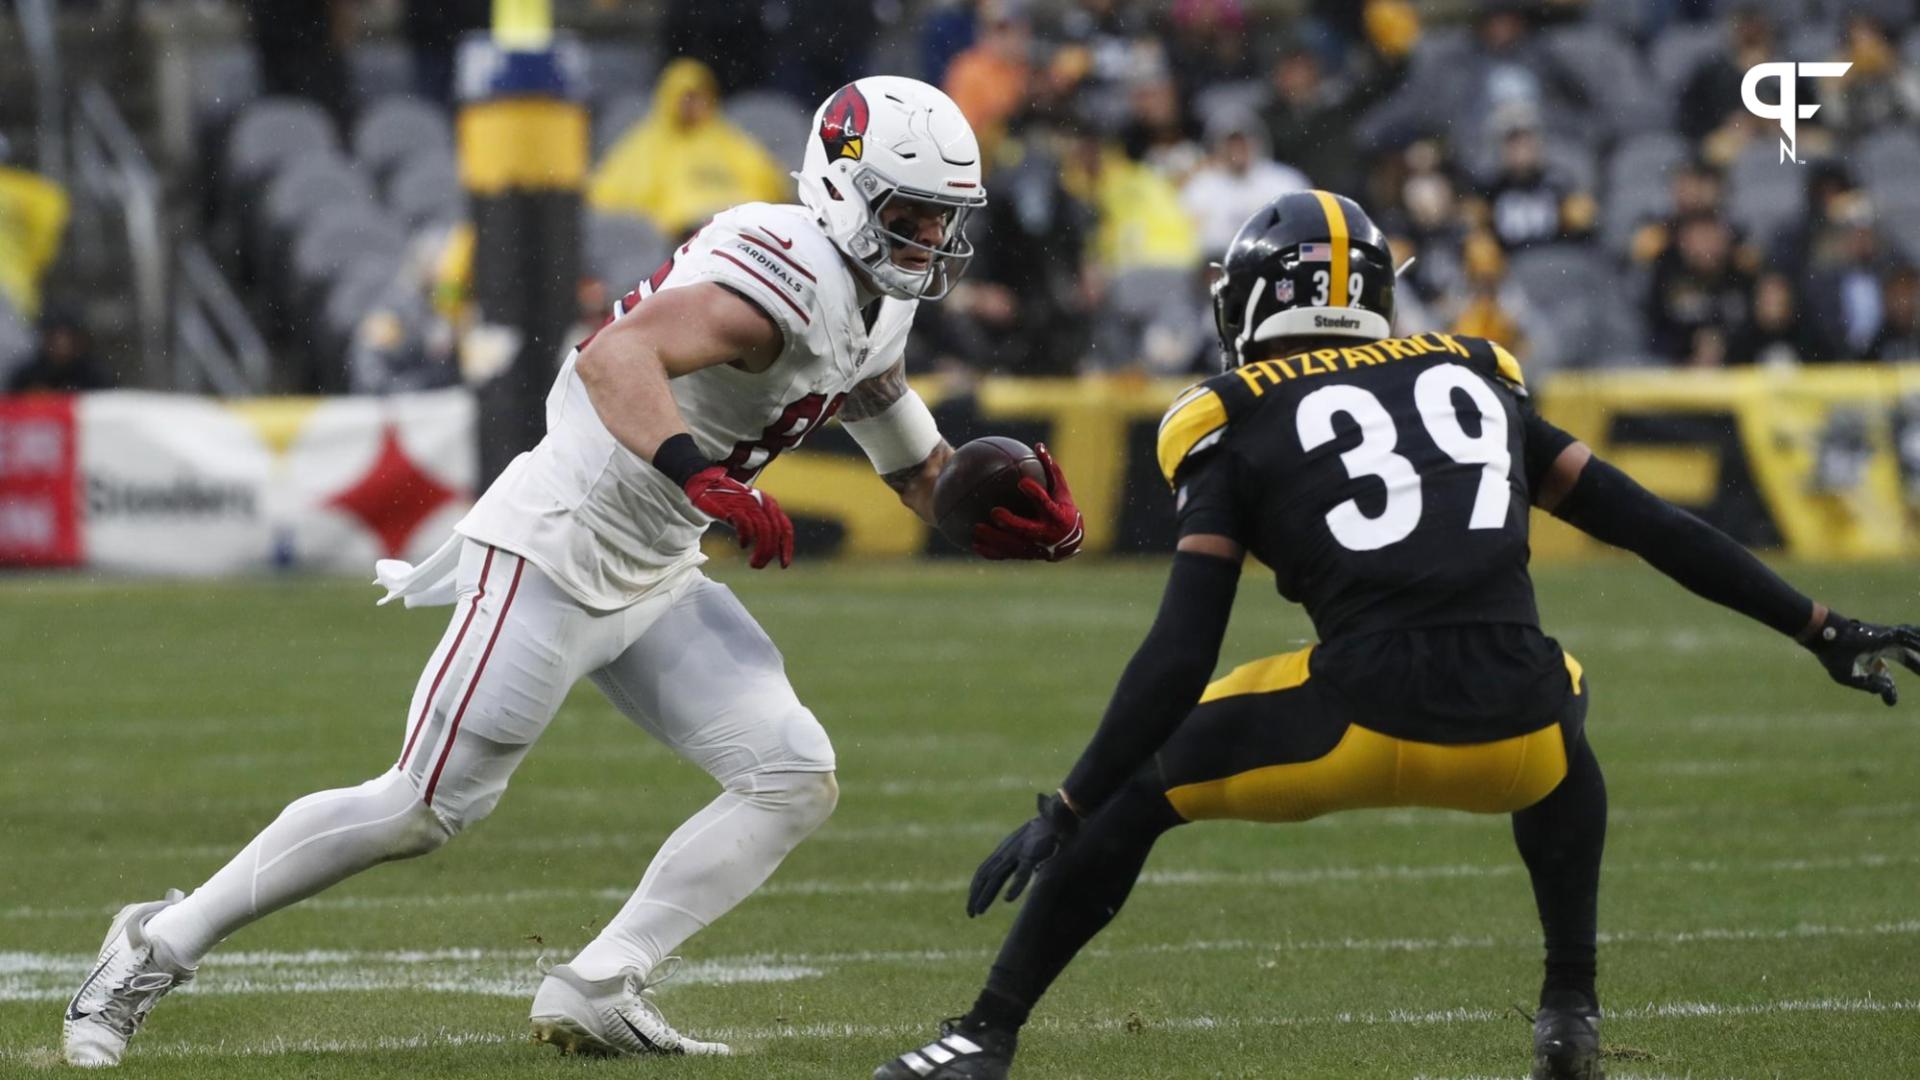 Arizona Cardinals tight end Trey McBride (85) runs after a catch as Pittsburgh Steelers safety Minkah Fitzpatrick (39) defends during the second quarter at Acrisure Stadium.